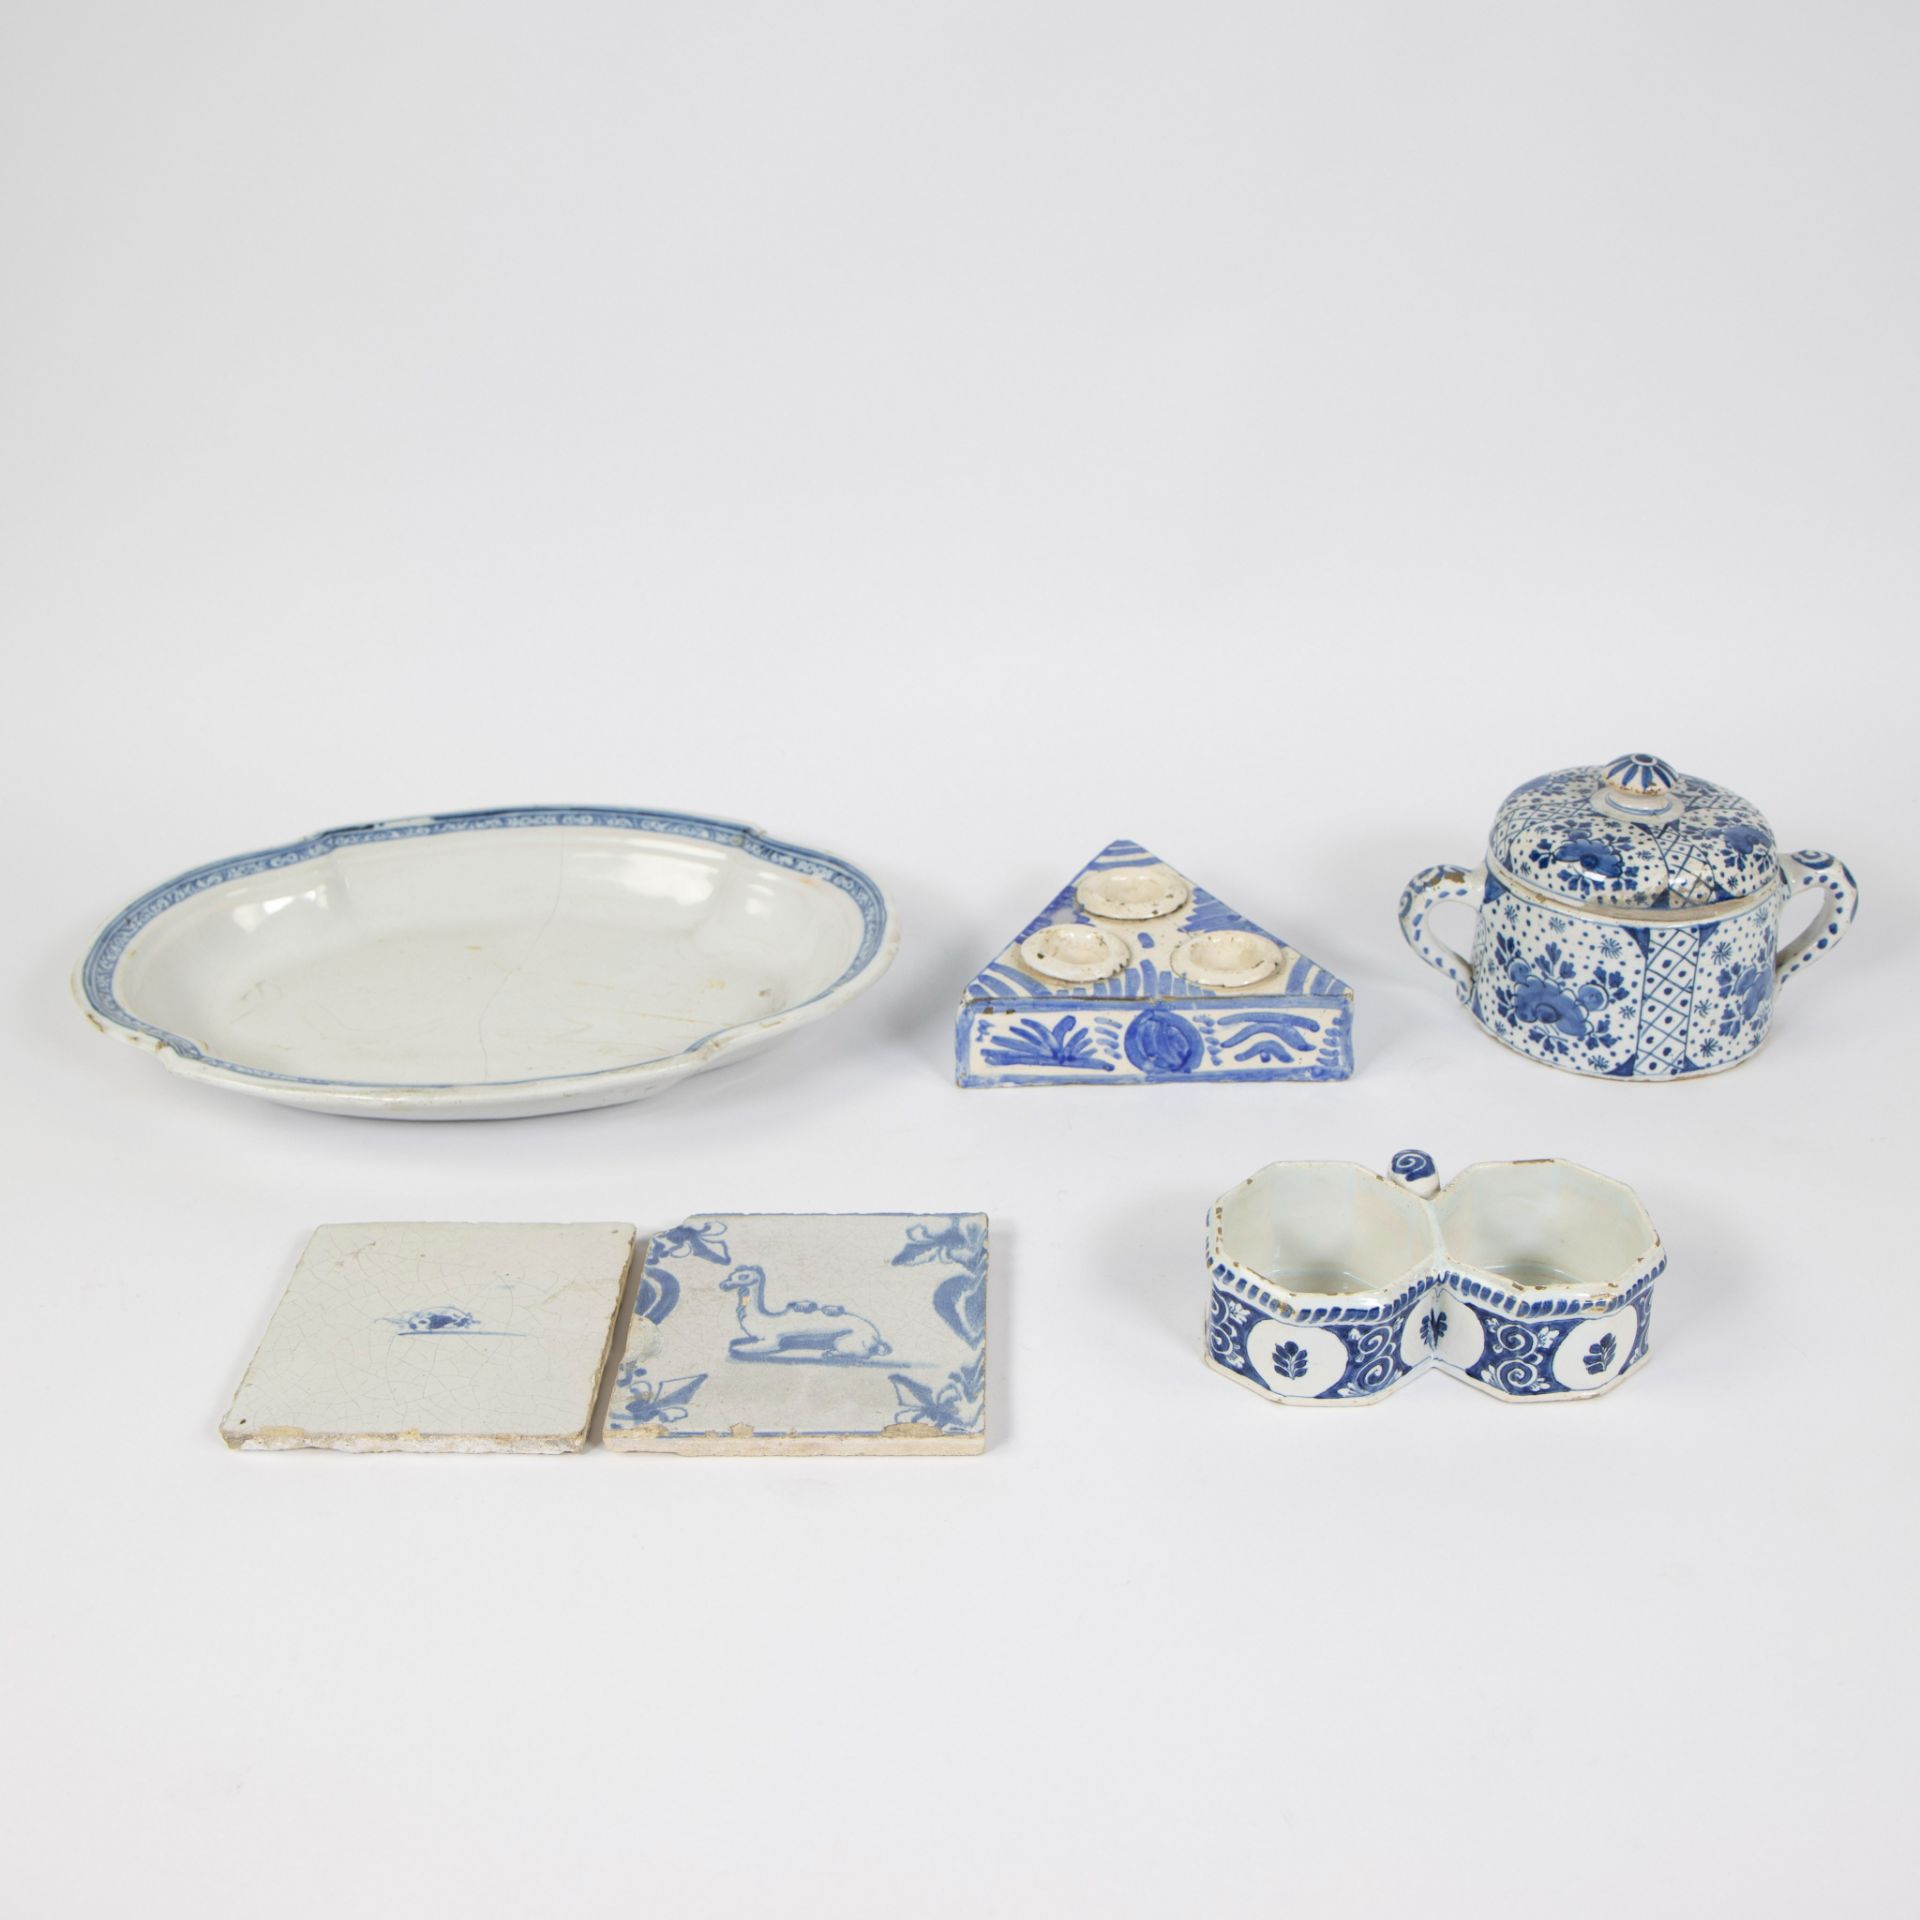 Collection of various faience, Moustier oval dish 18th, 2 Delft tile 17th, Spanish salt and spice ve - Image 2 of 12